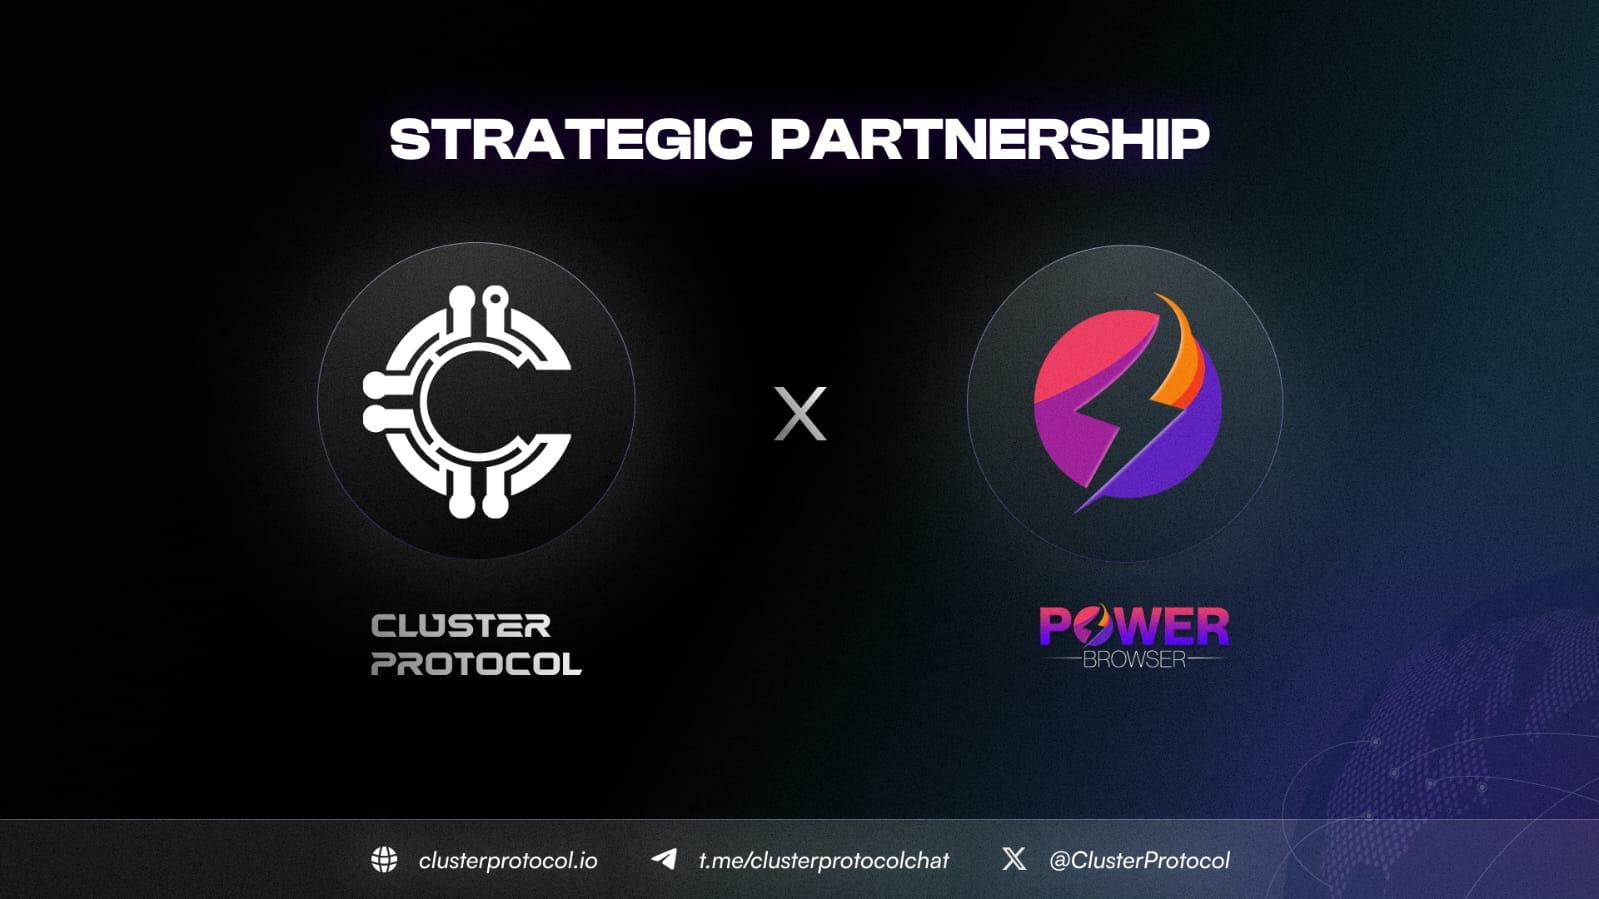 Cluster Protocol announces its strategic partnership with Power Browser